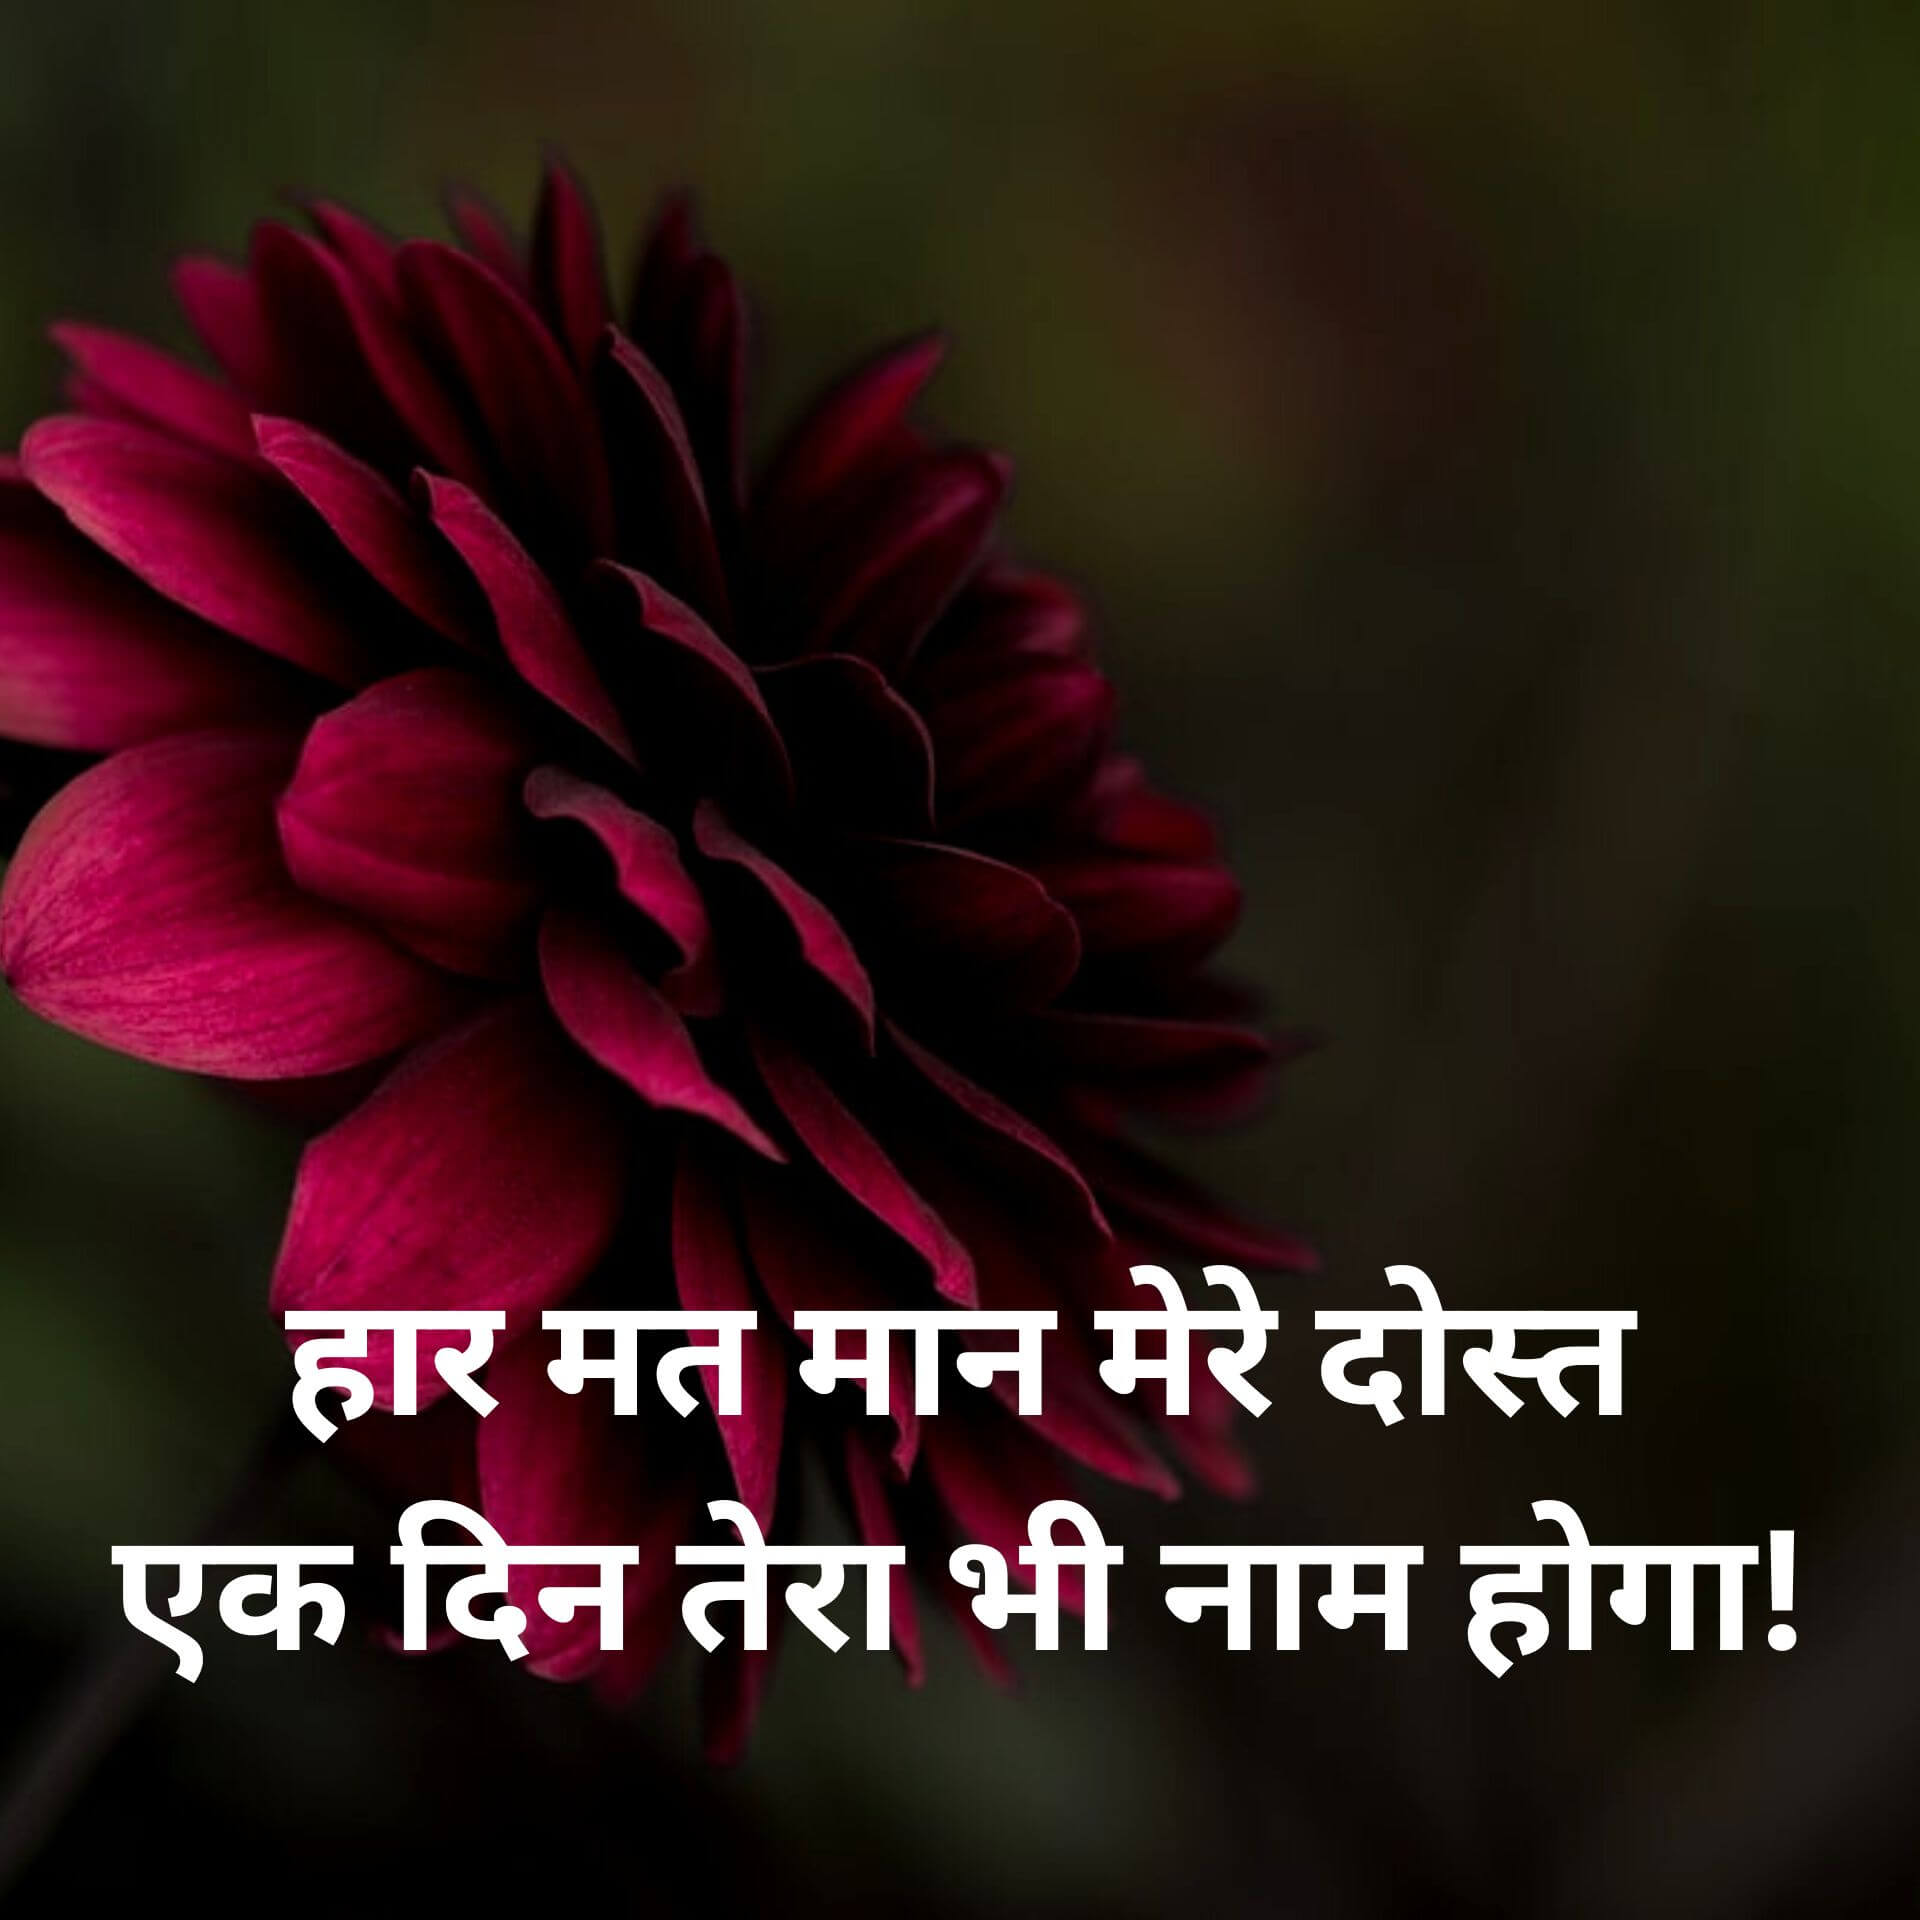 Free Hindi Motivational Quotes Wallpaper Download for Whatsapp